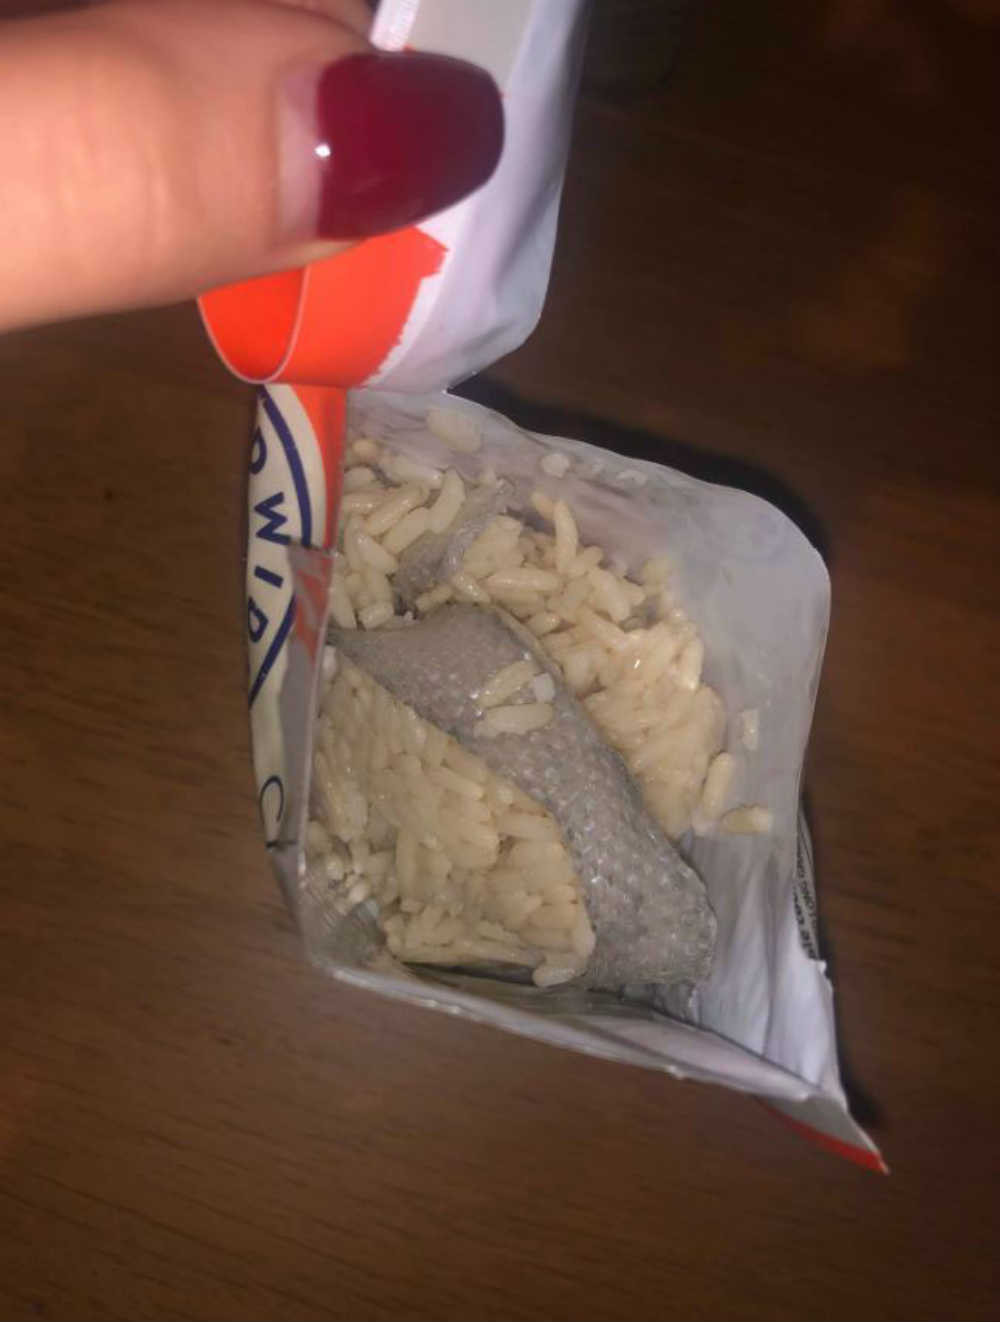 Lidl customer violently sick after spotting cooked mouse in her rice bag   Expresscouk